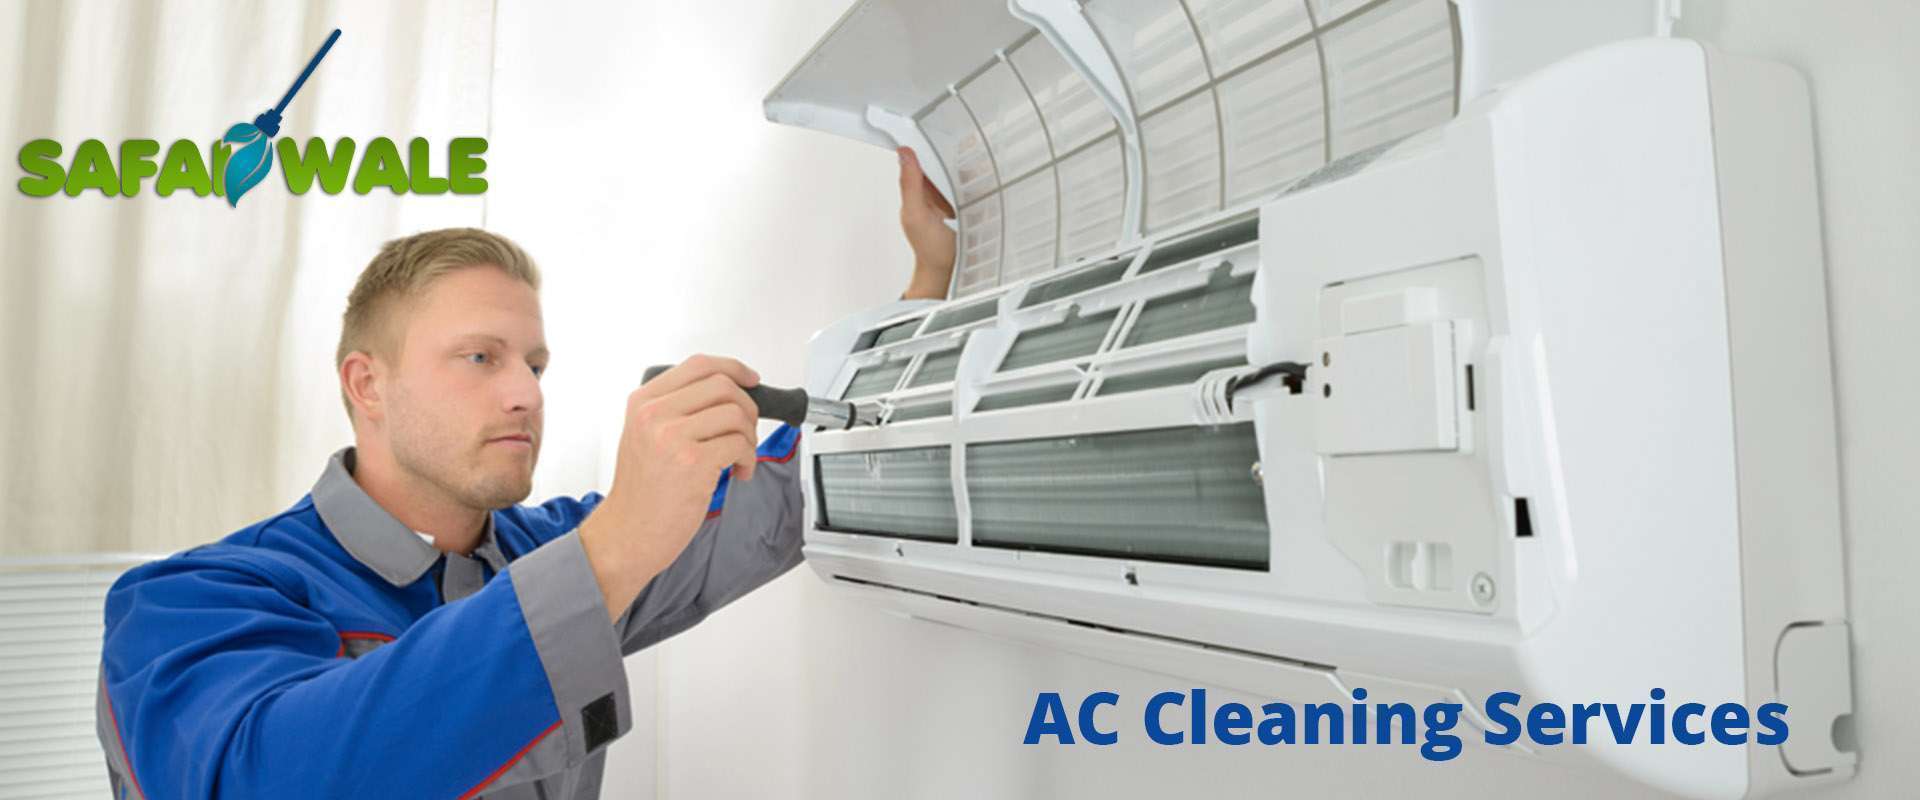 ac cleaning services in Chandigarh